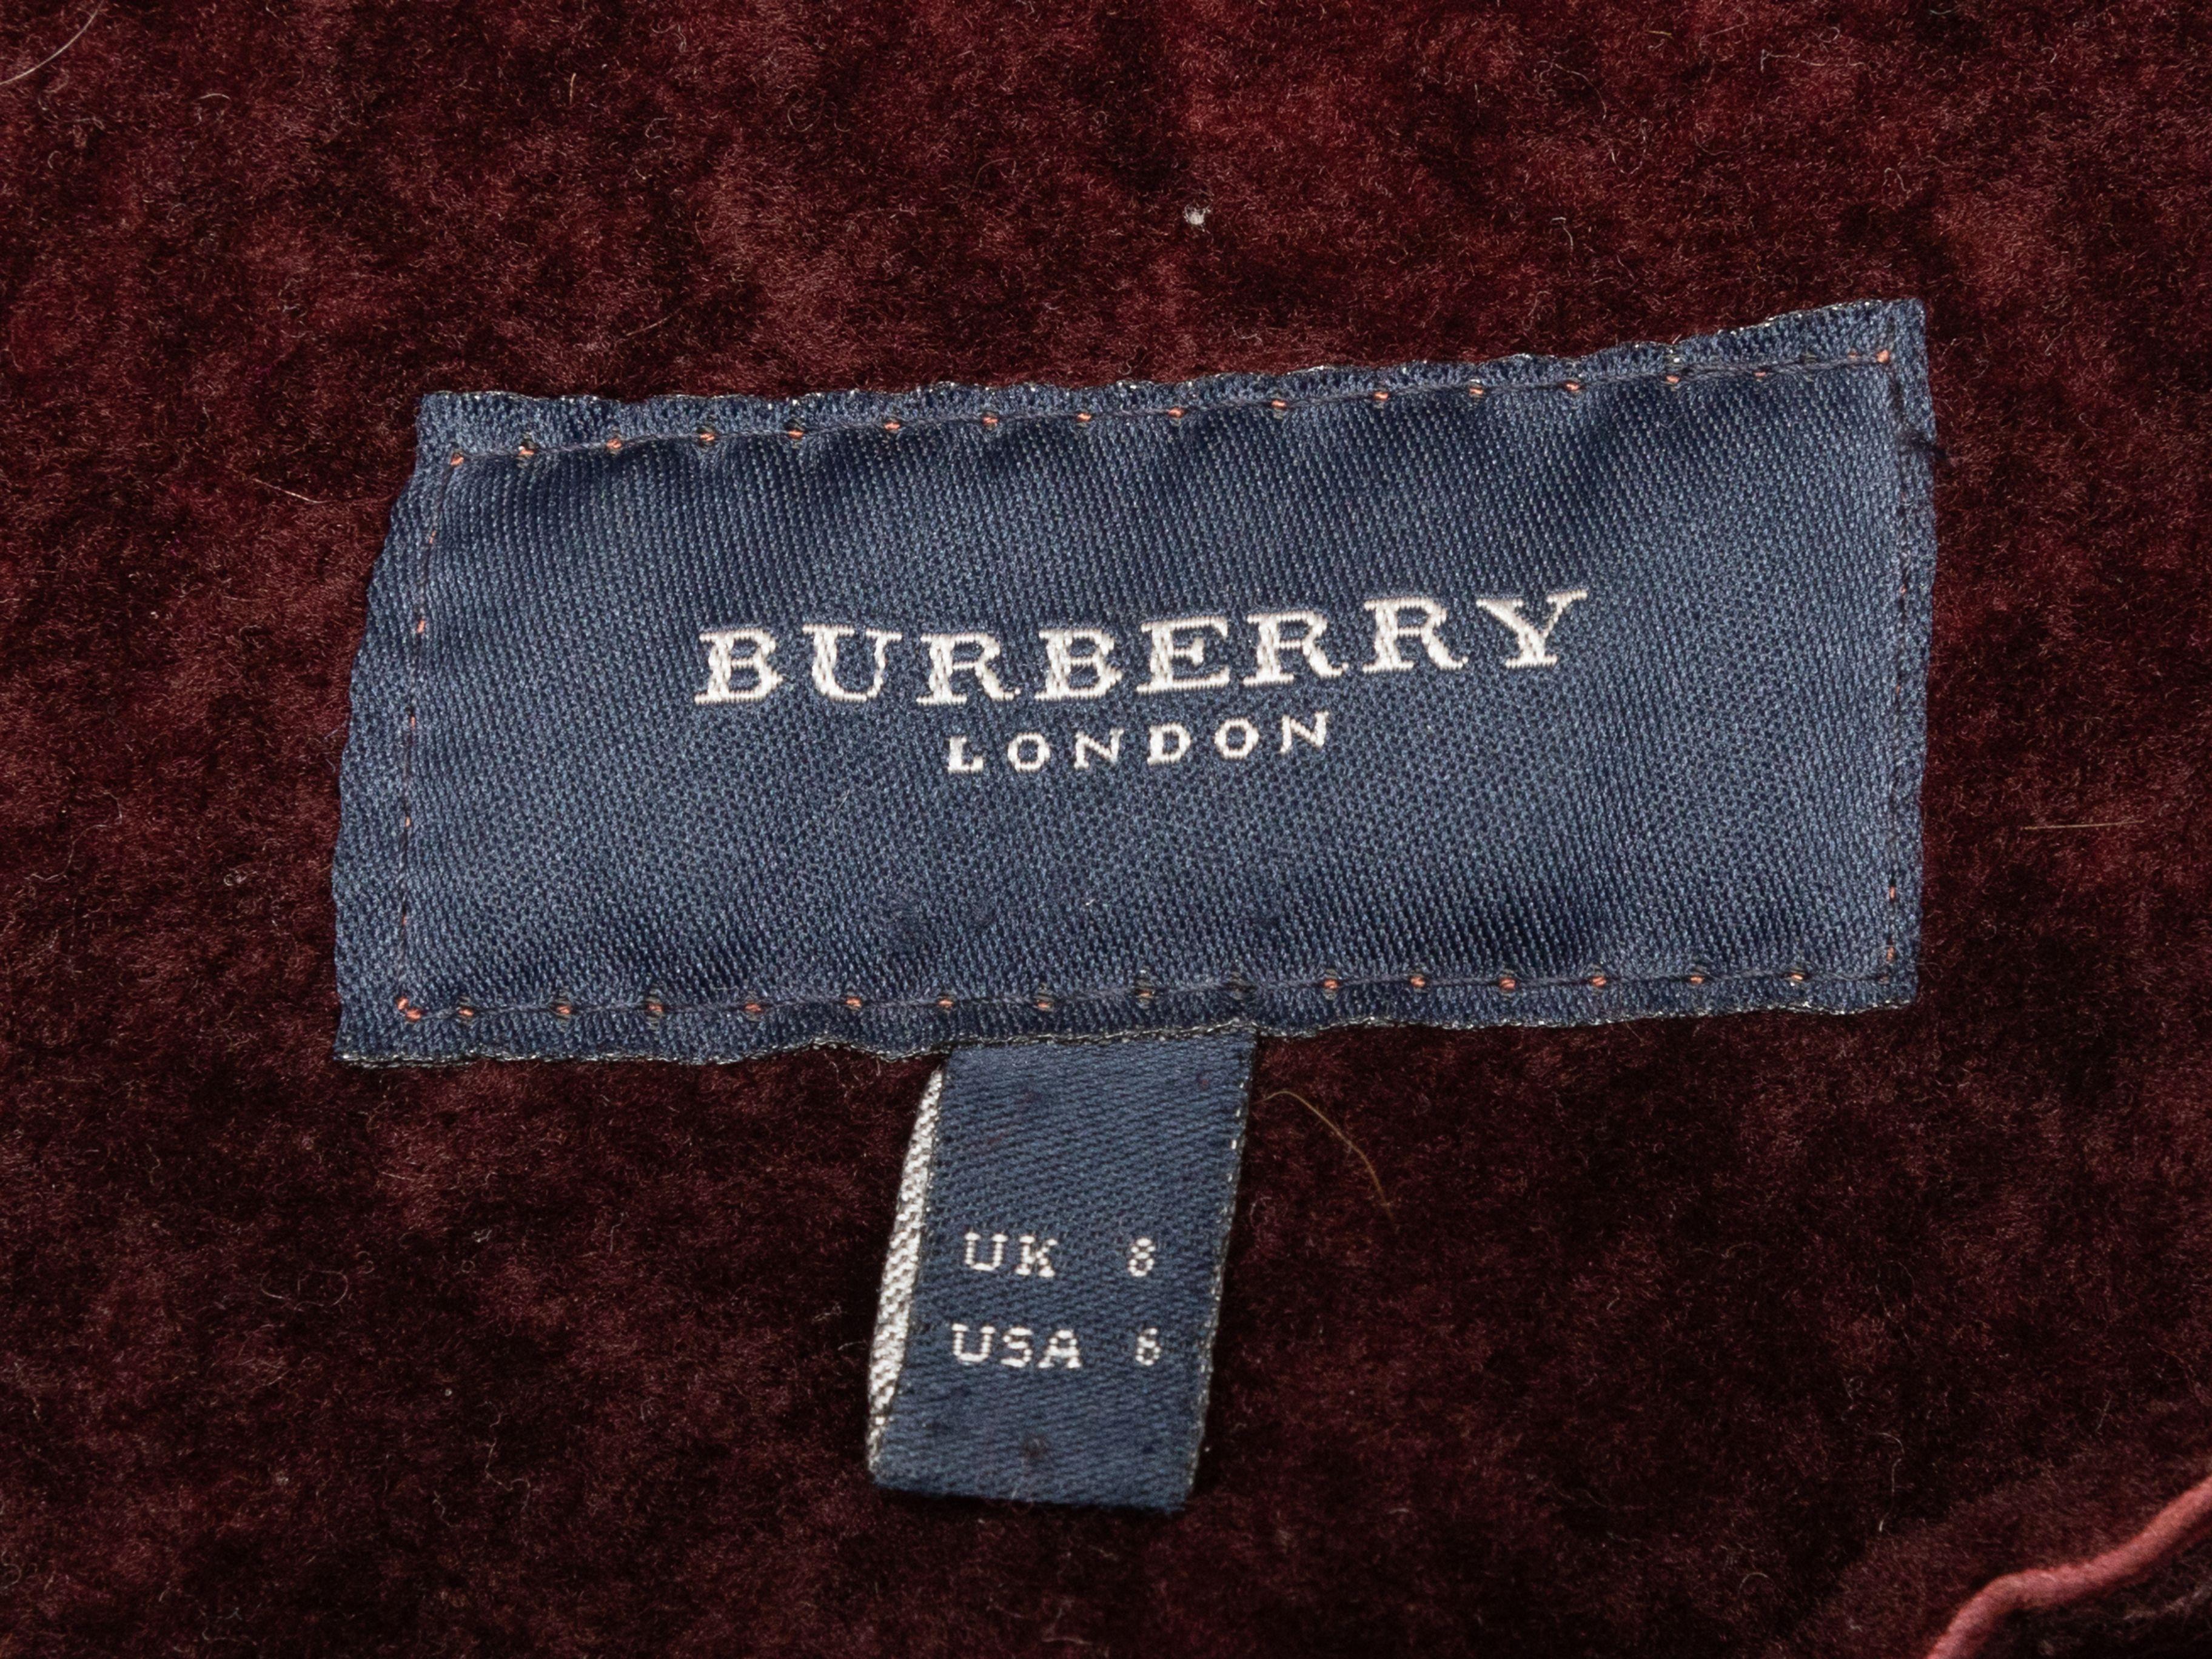 Product Details: Burgundy long shearling coat by Burberry. Pointed collar. Dual hip pockets. Button closures at center front. 37